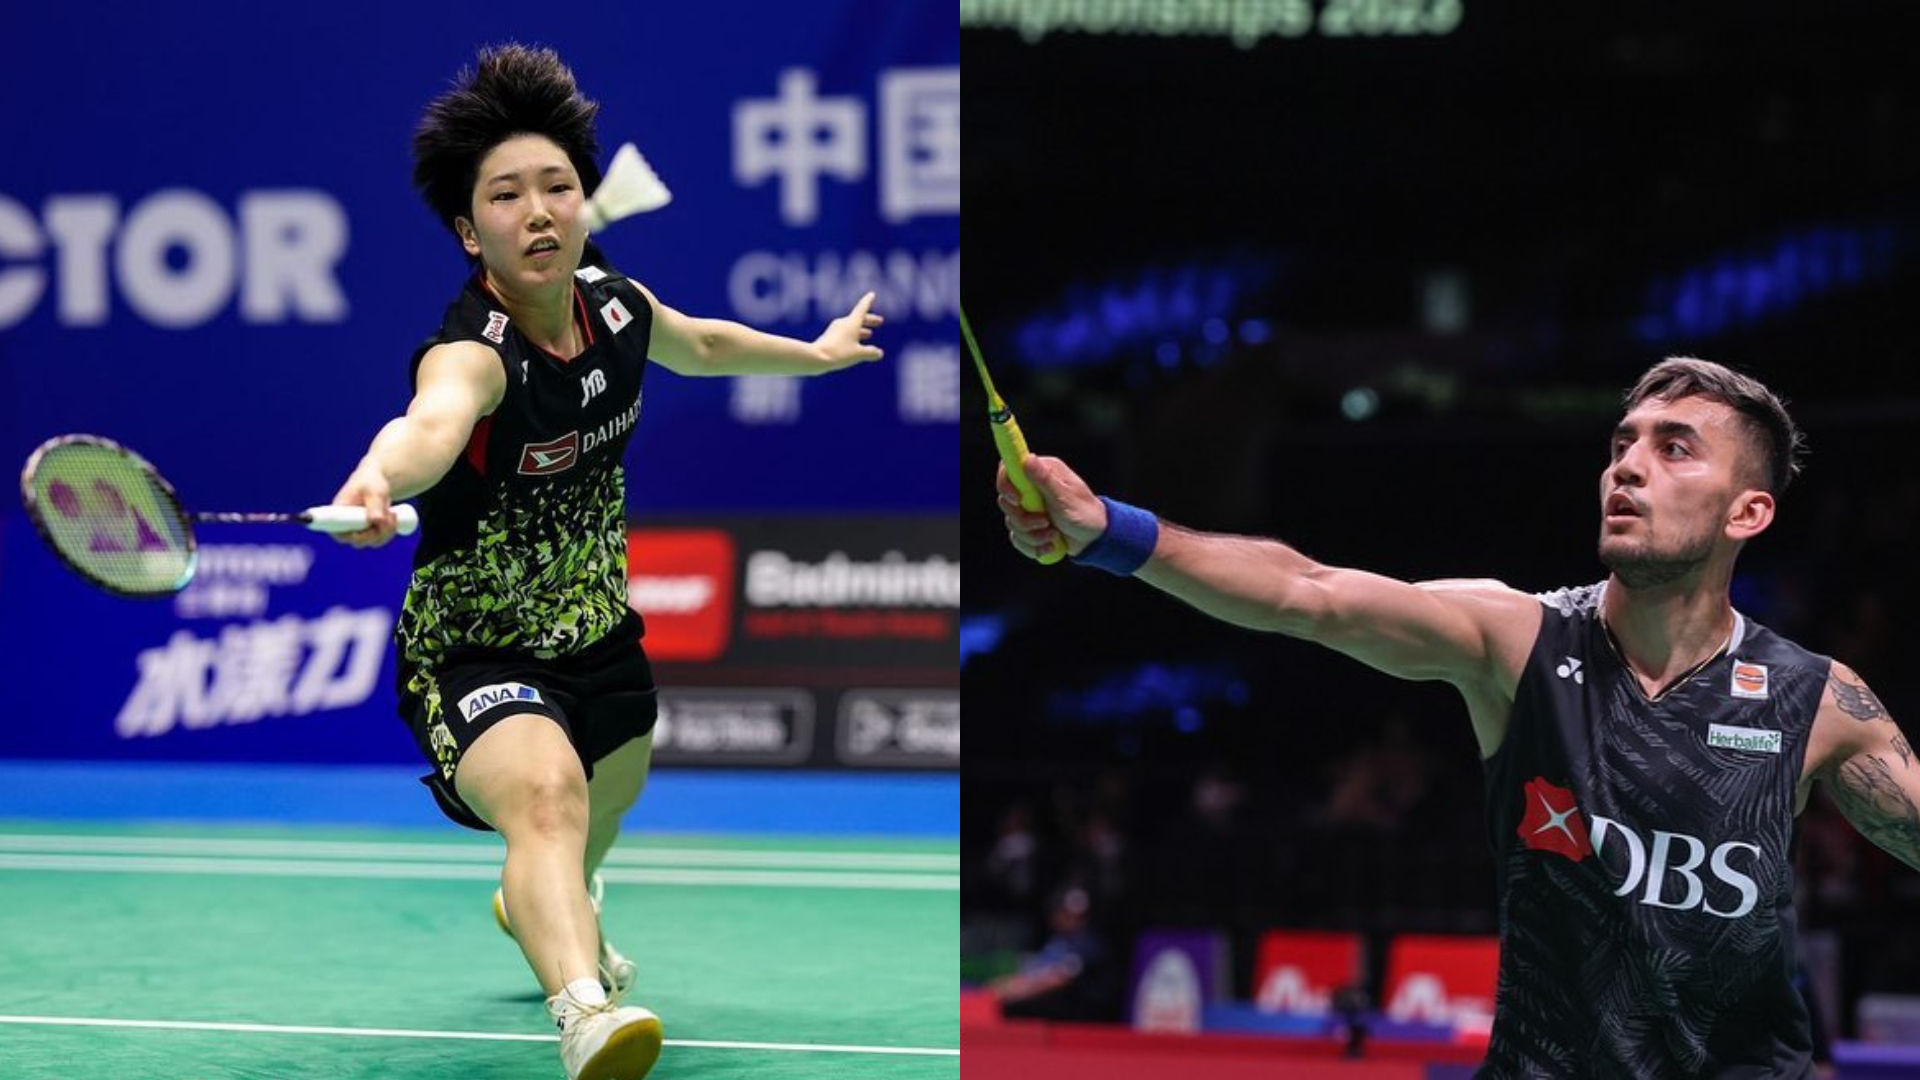 Hong Kong Open 2023 (Badminton) A Look At The Prize Money On Offer